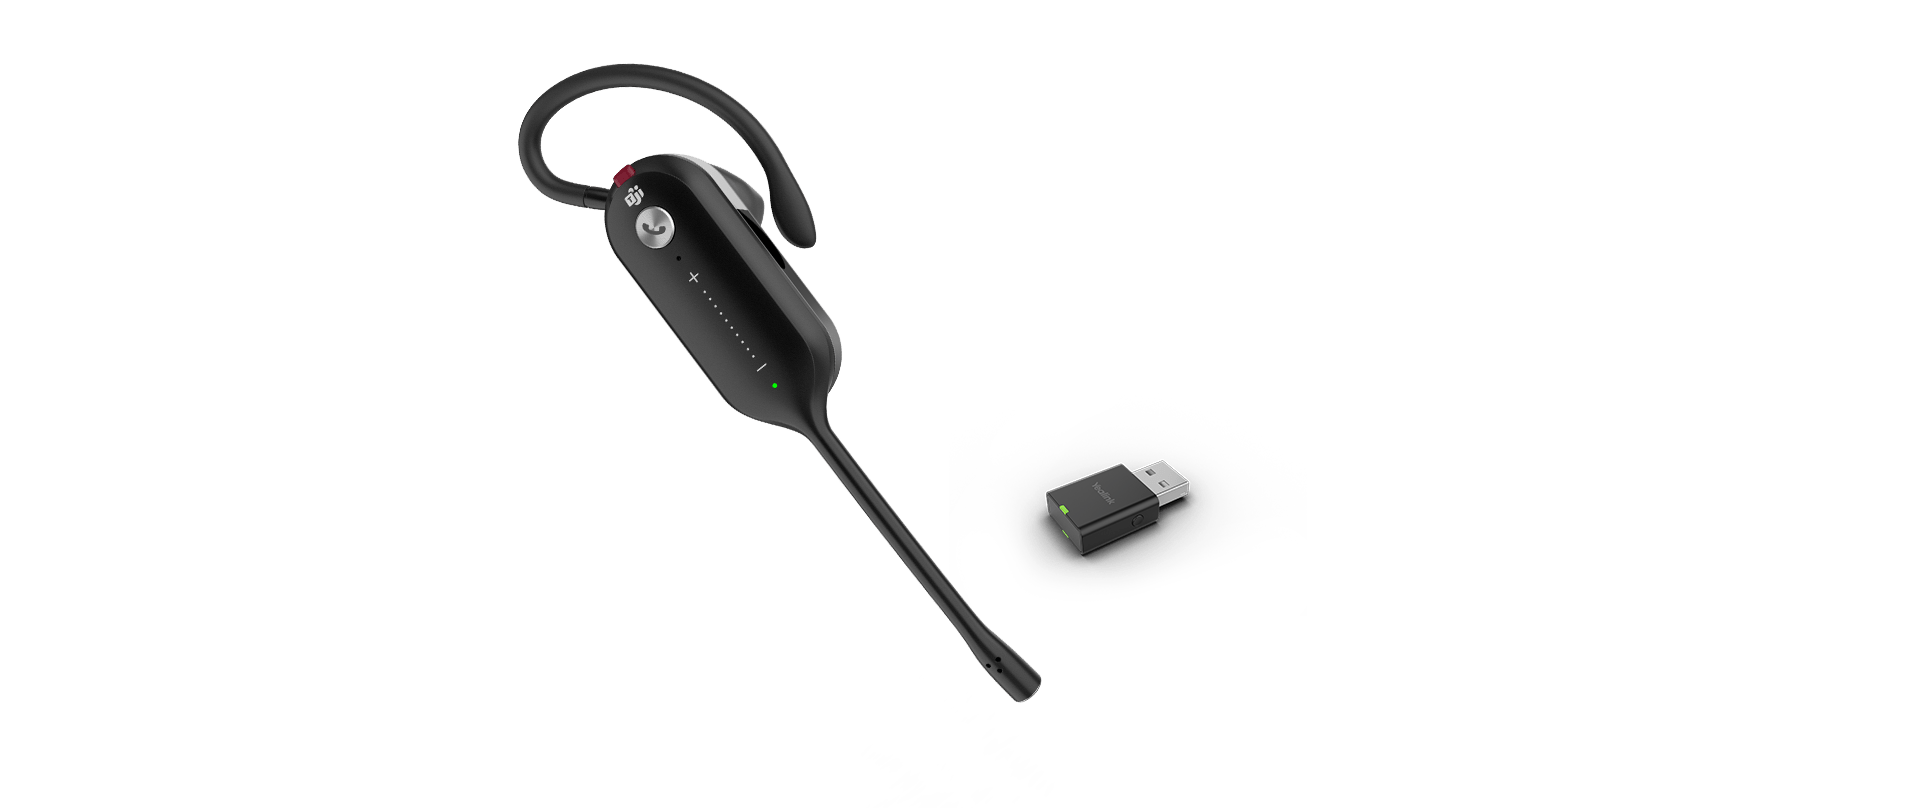 Yealink WH63 Portable DECT Headset